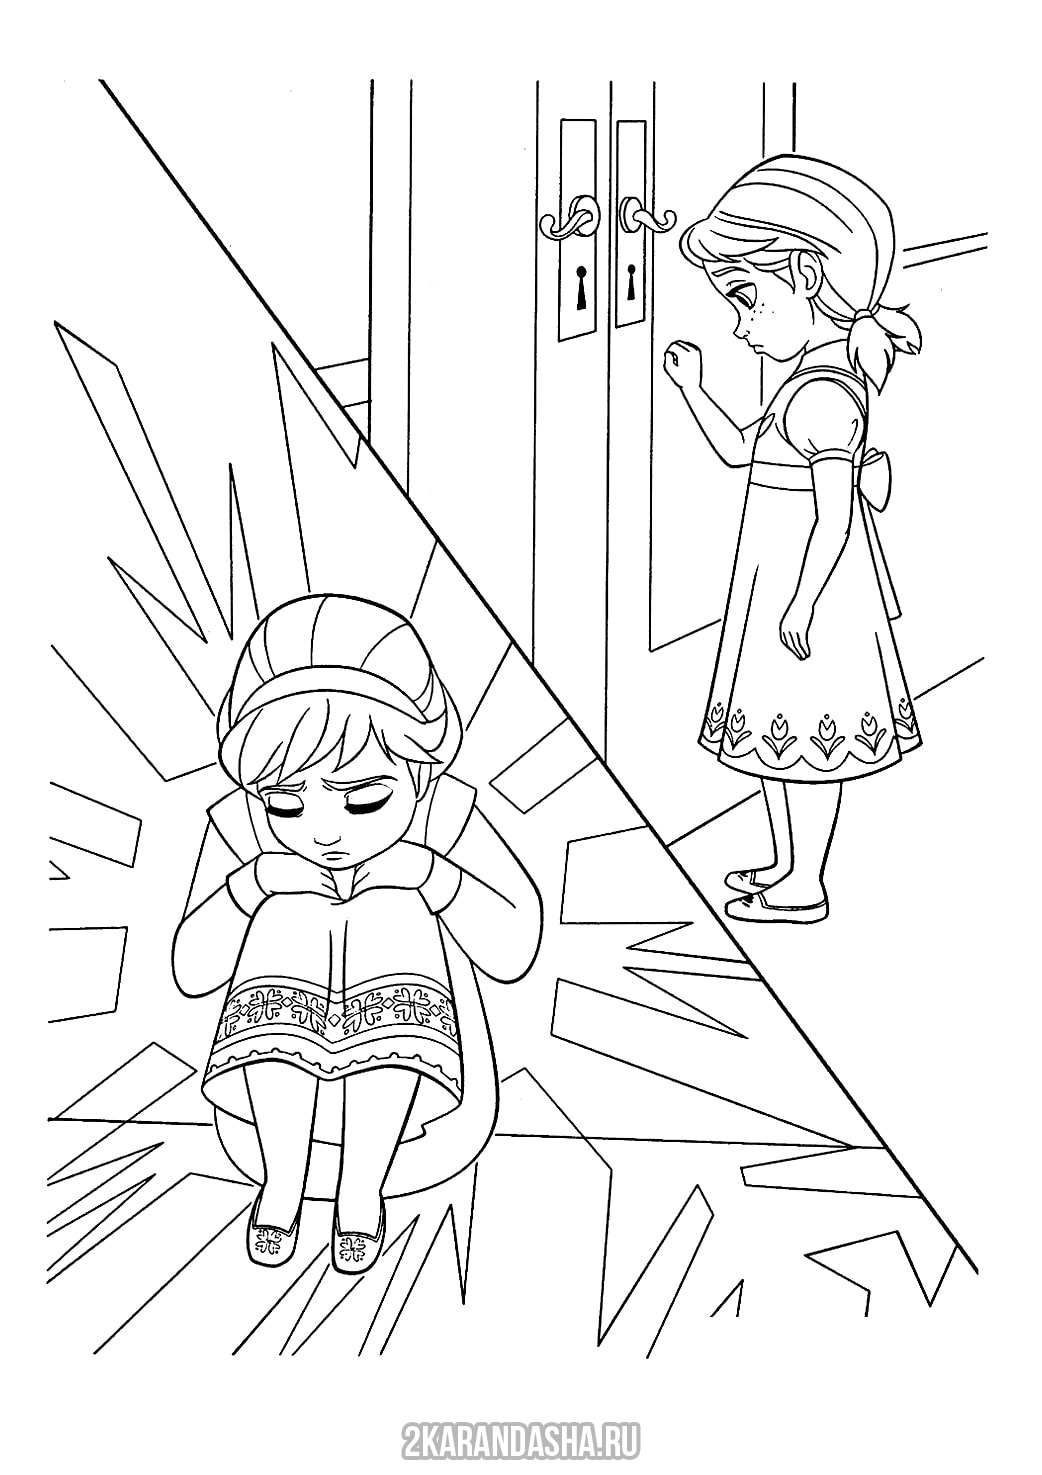 Coloring Page Frozen Little Sisters Elsa And Anna For Girls To Print